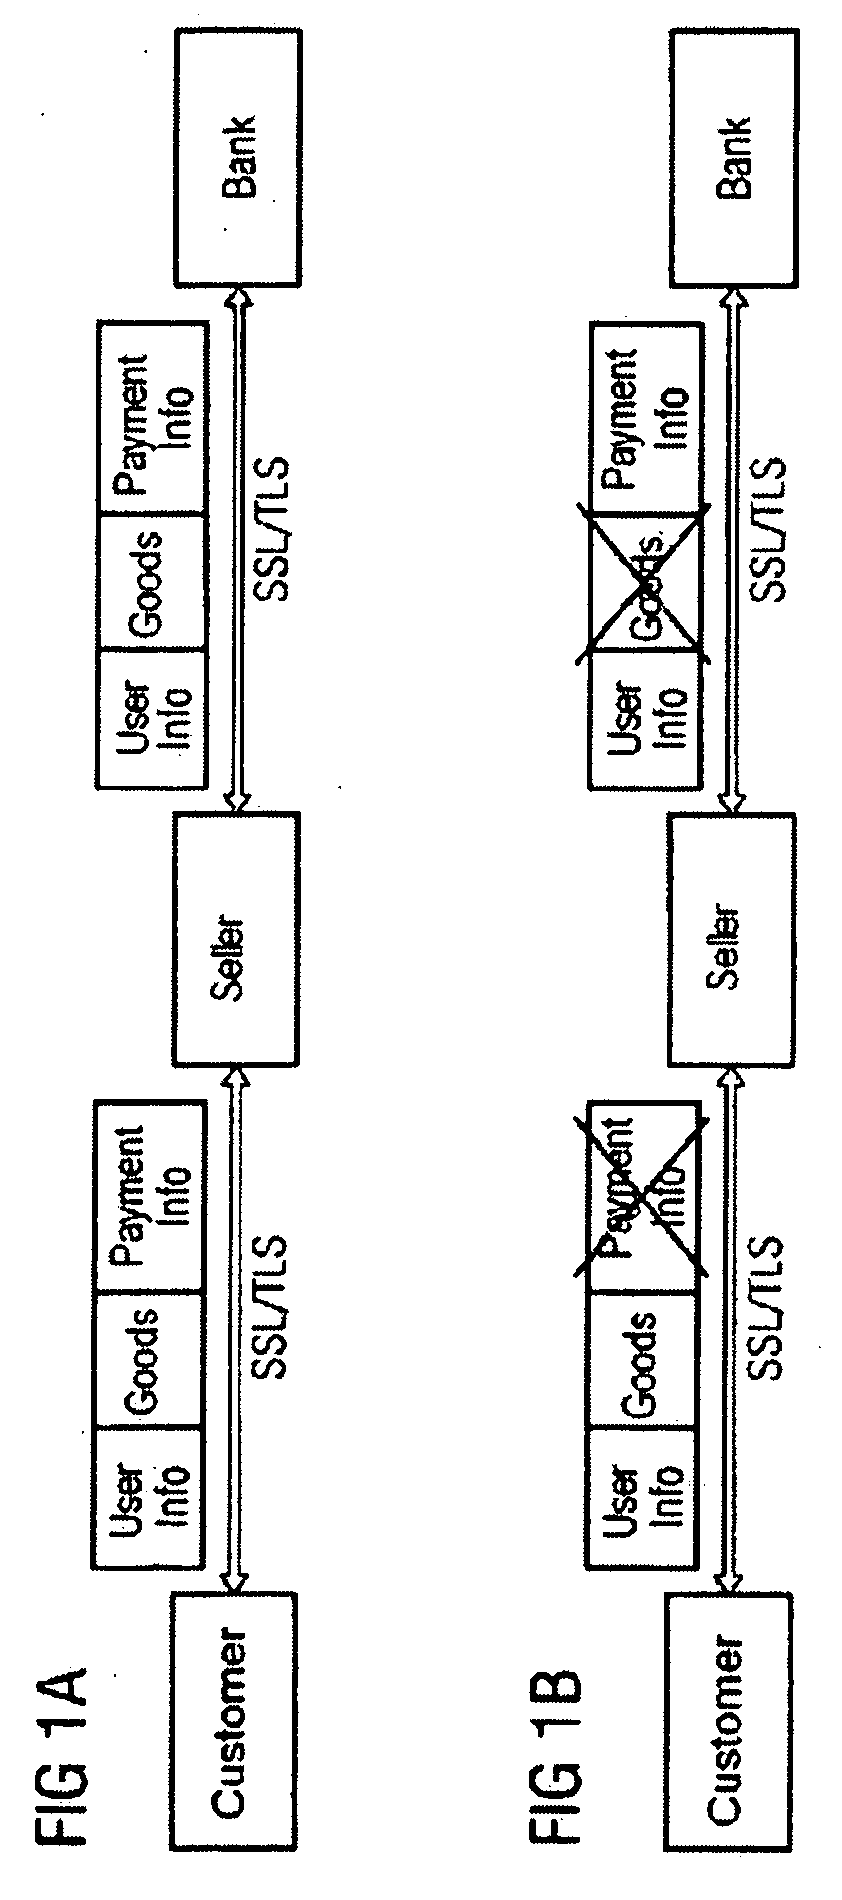 Method for transmitting protected information to a plurality of recipients